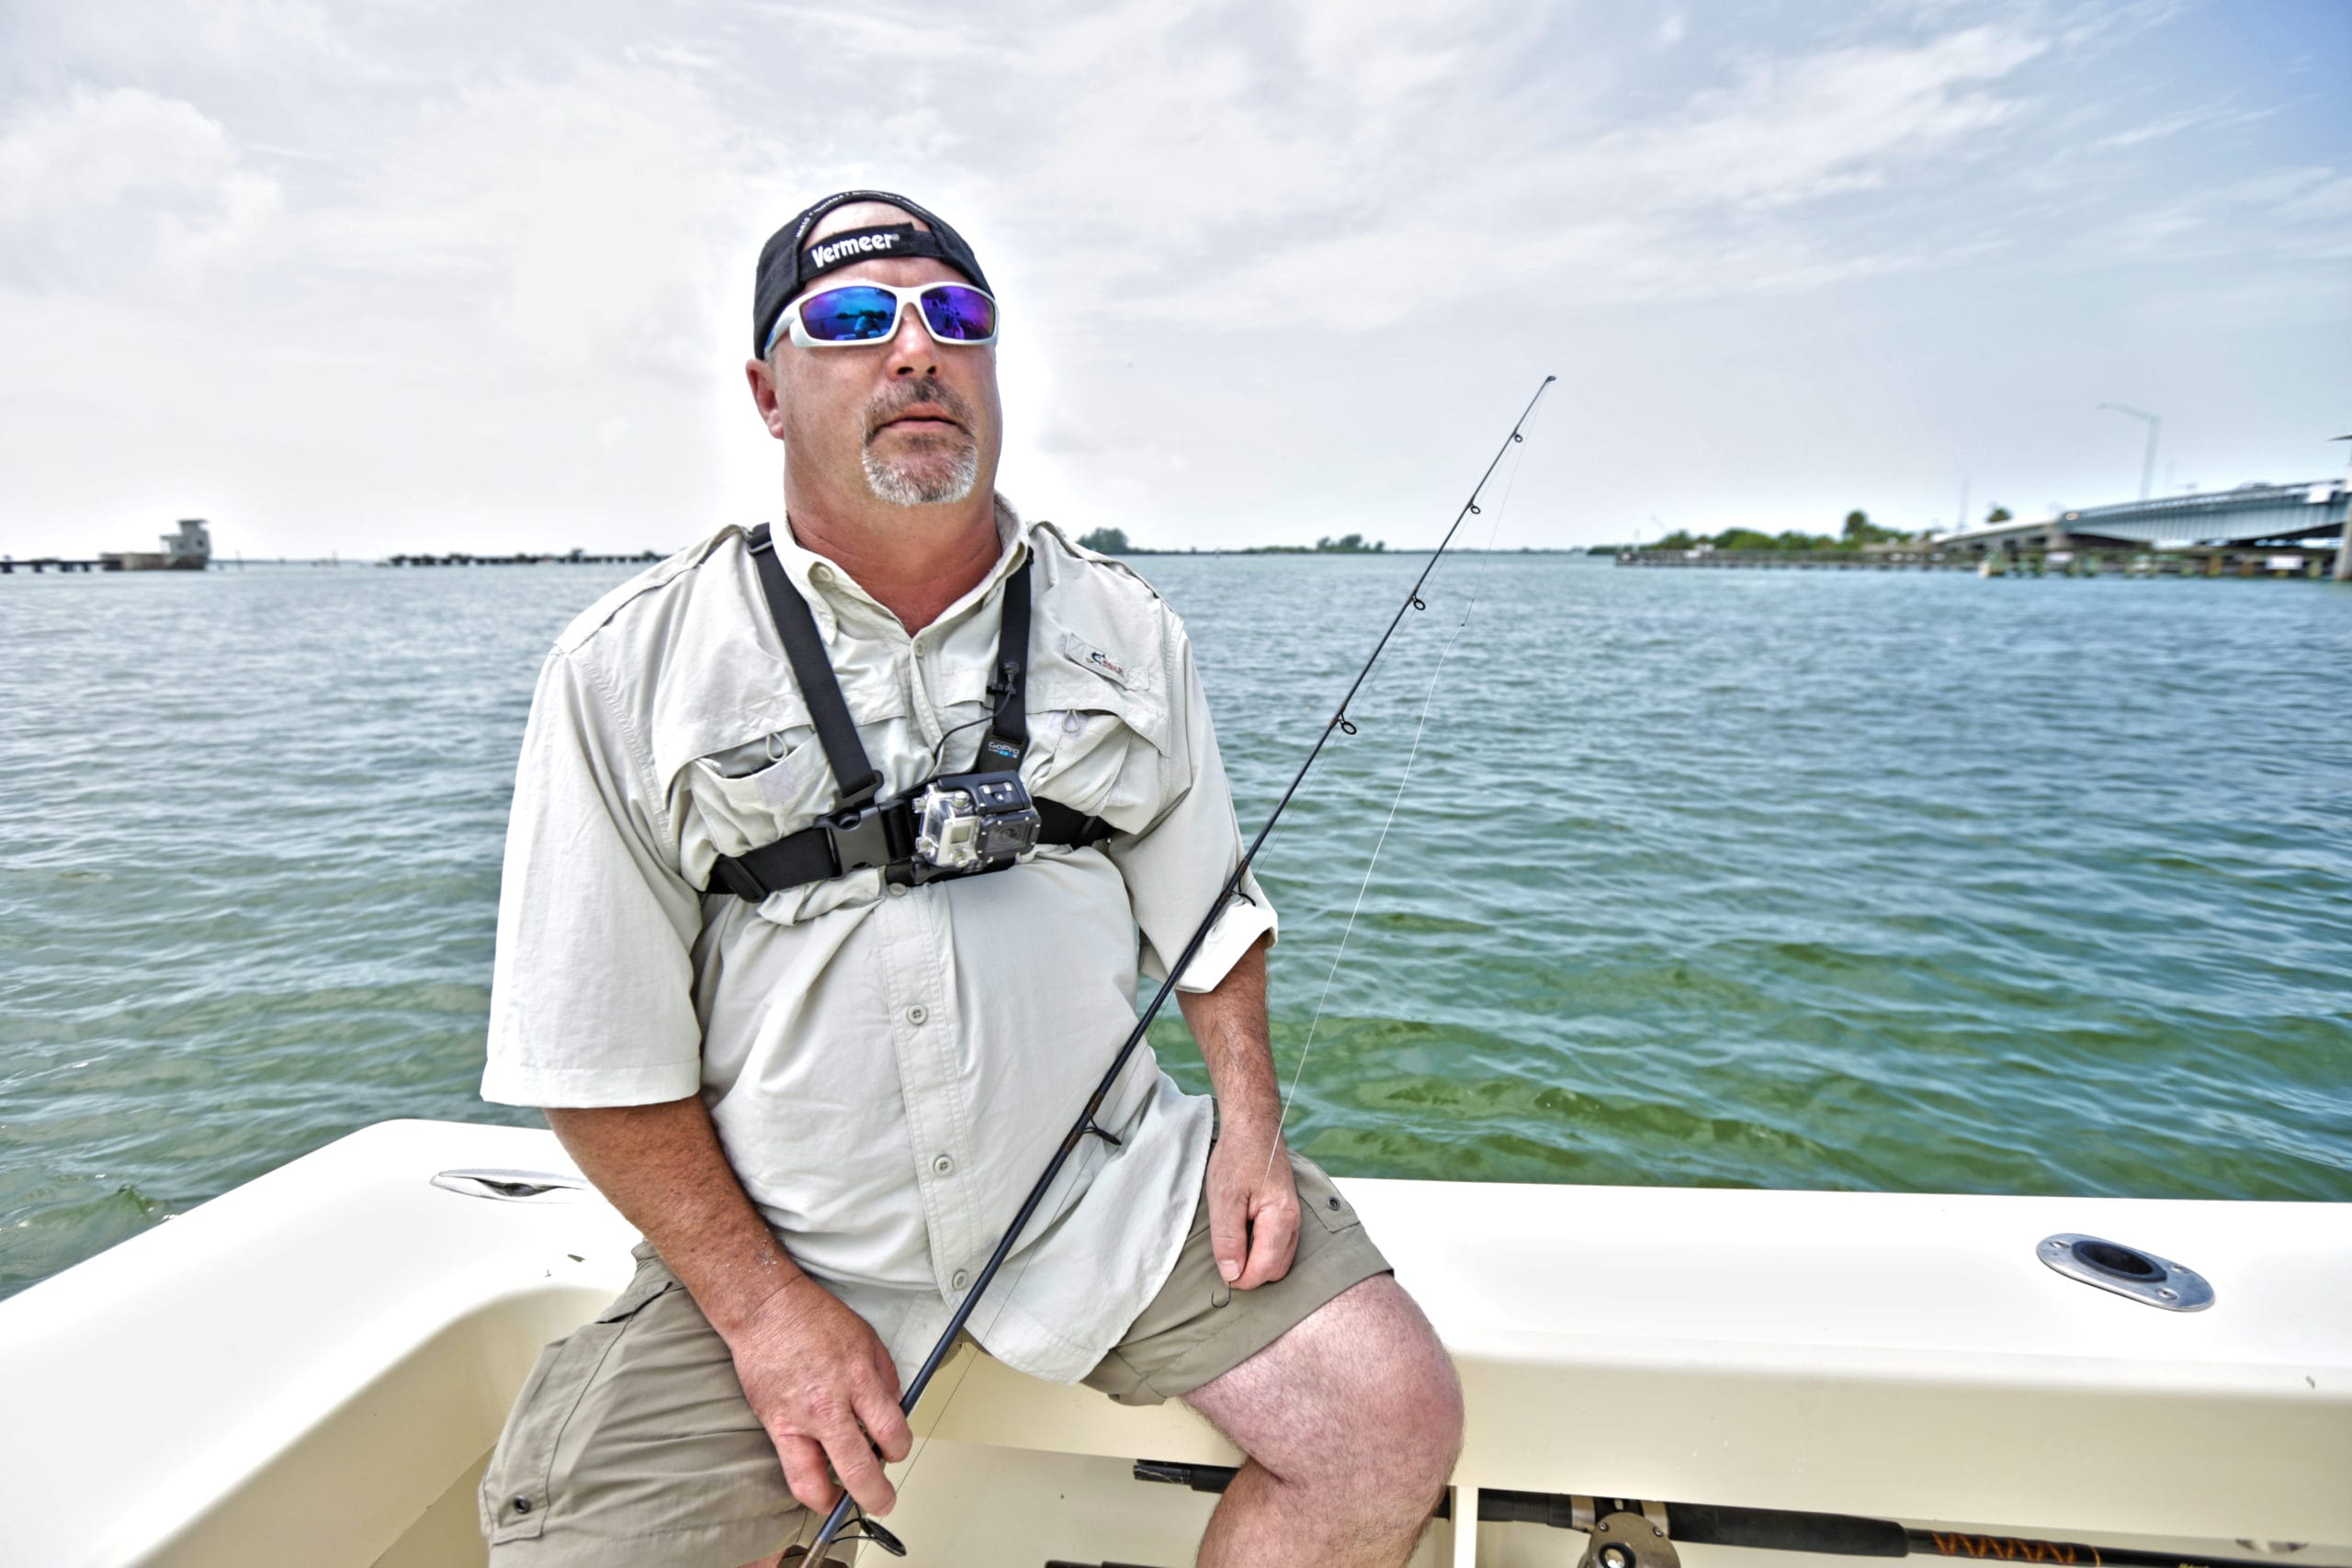 Bradley Richmond fishes tarpon in Florida's famed Boca Grande with Brotherhood Outdoors Feb. 9 at 11 a.m. ET, on the Sportsman Channel.